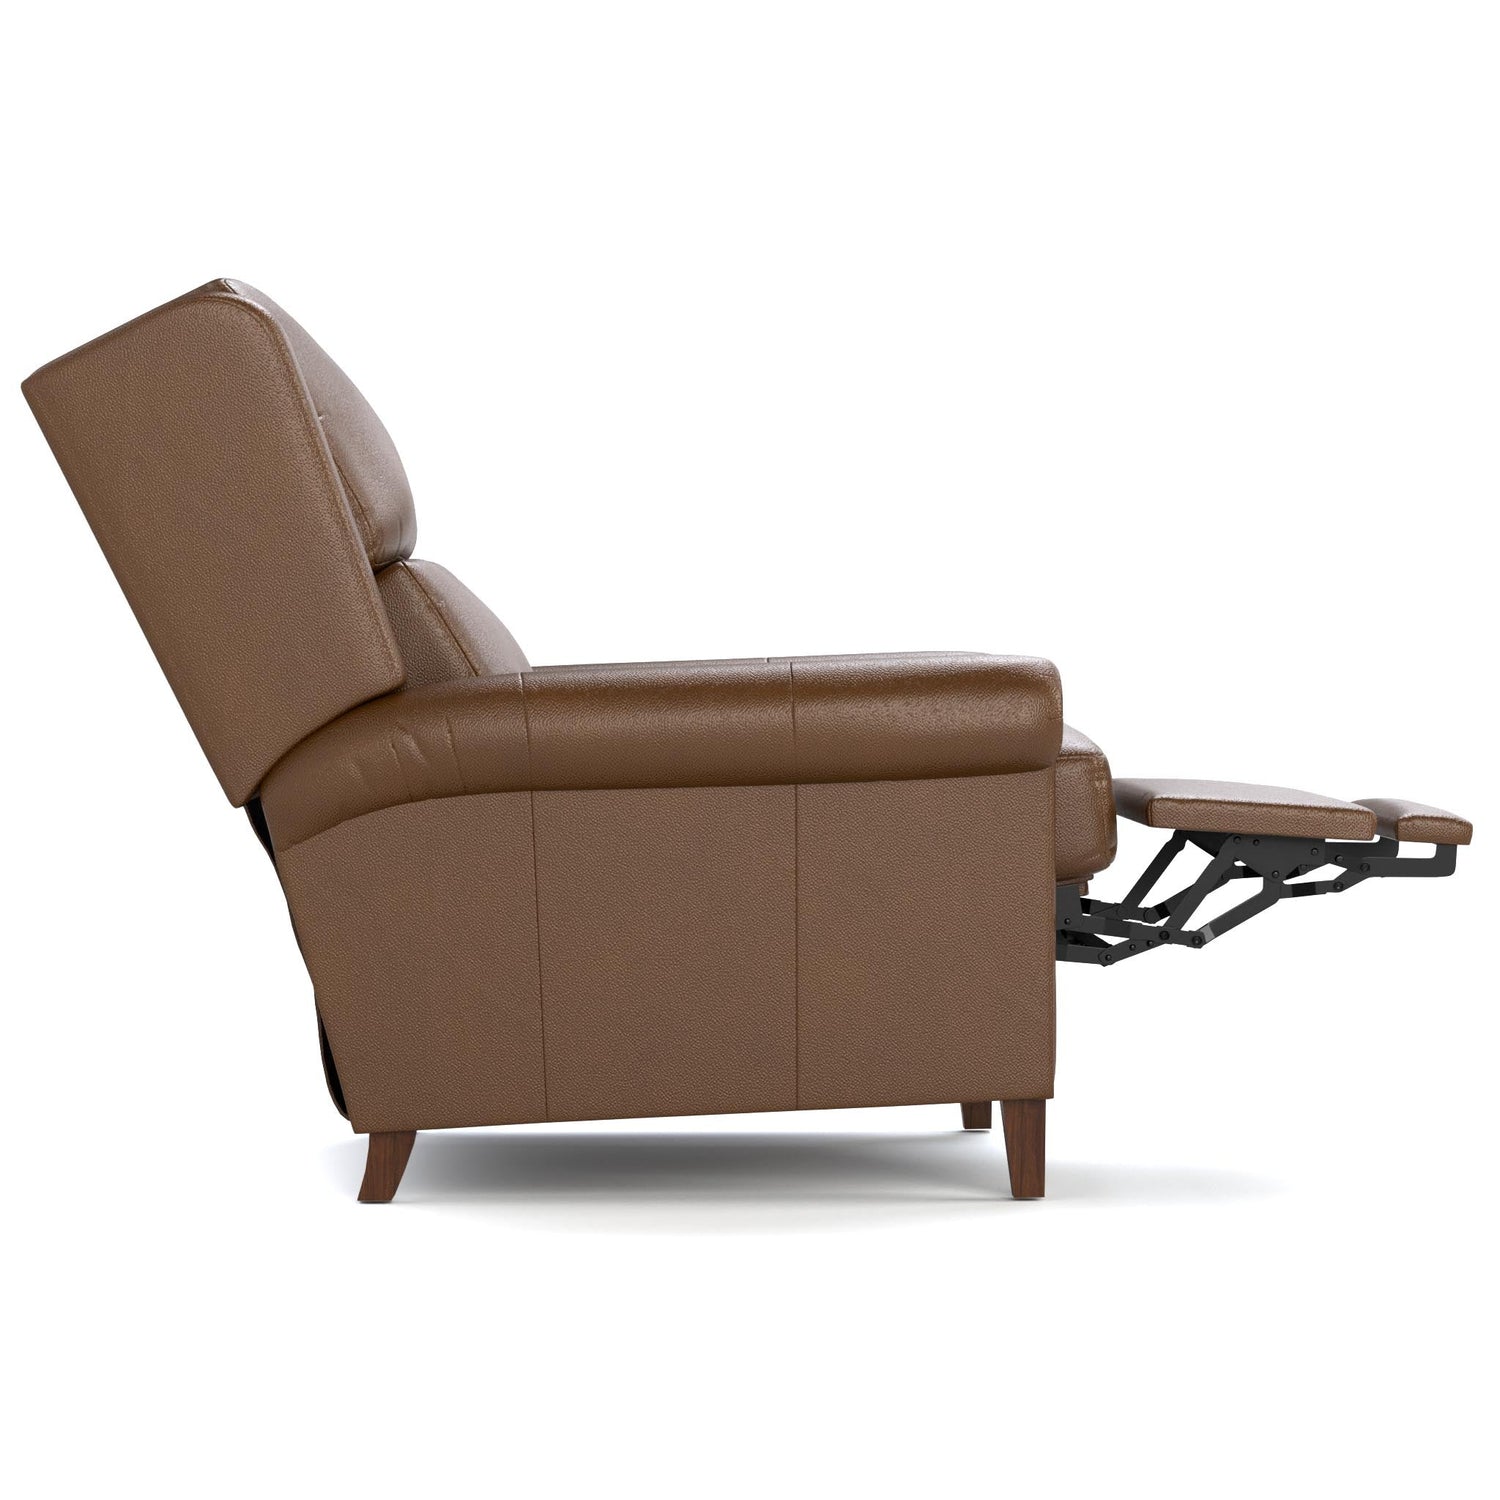 Woodlands Small Roll Arm Manual Recliner Selvano Bark - Side Reclined